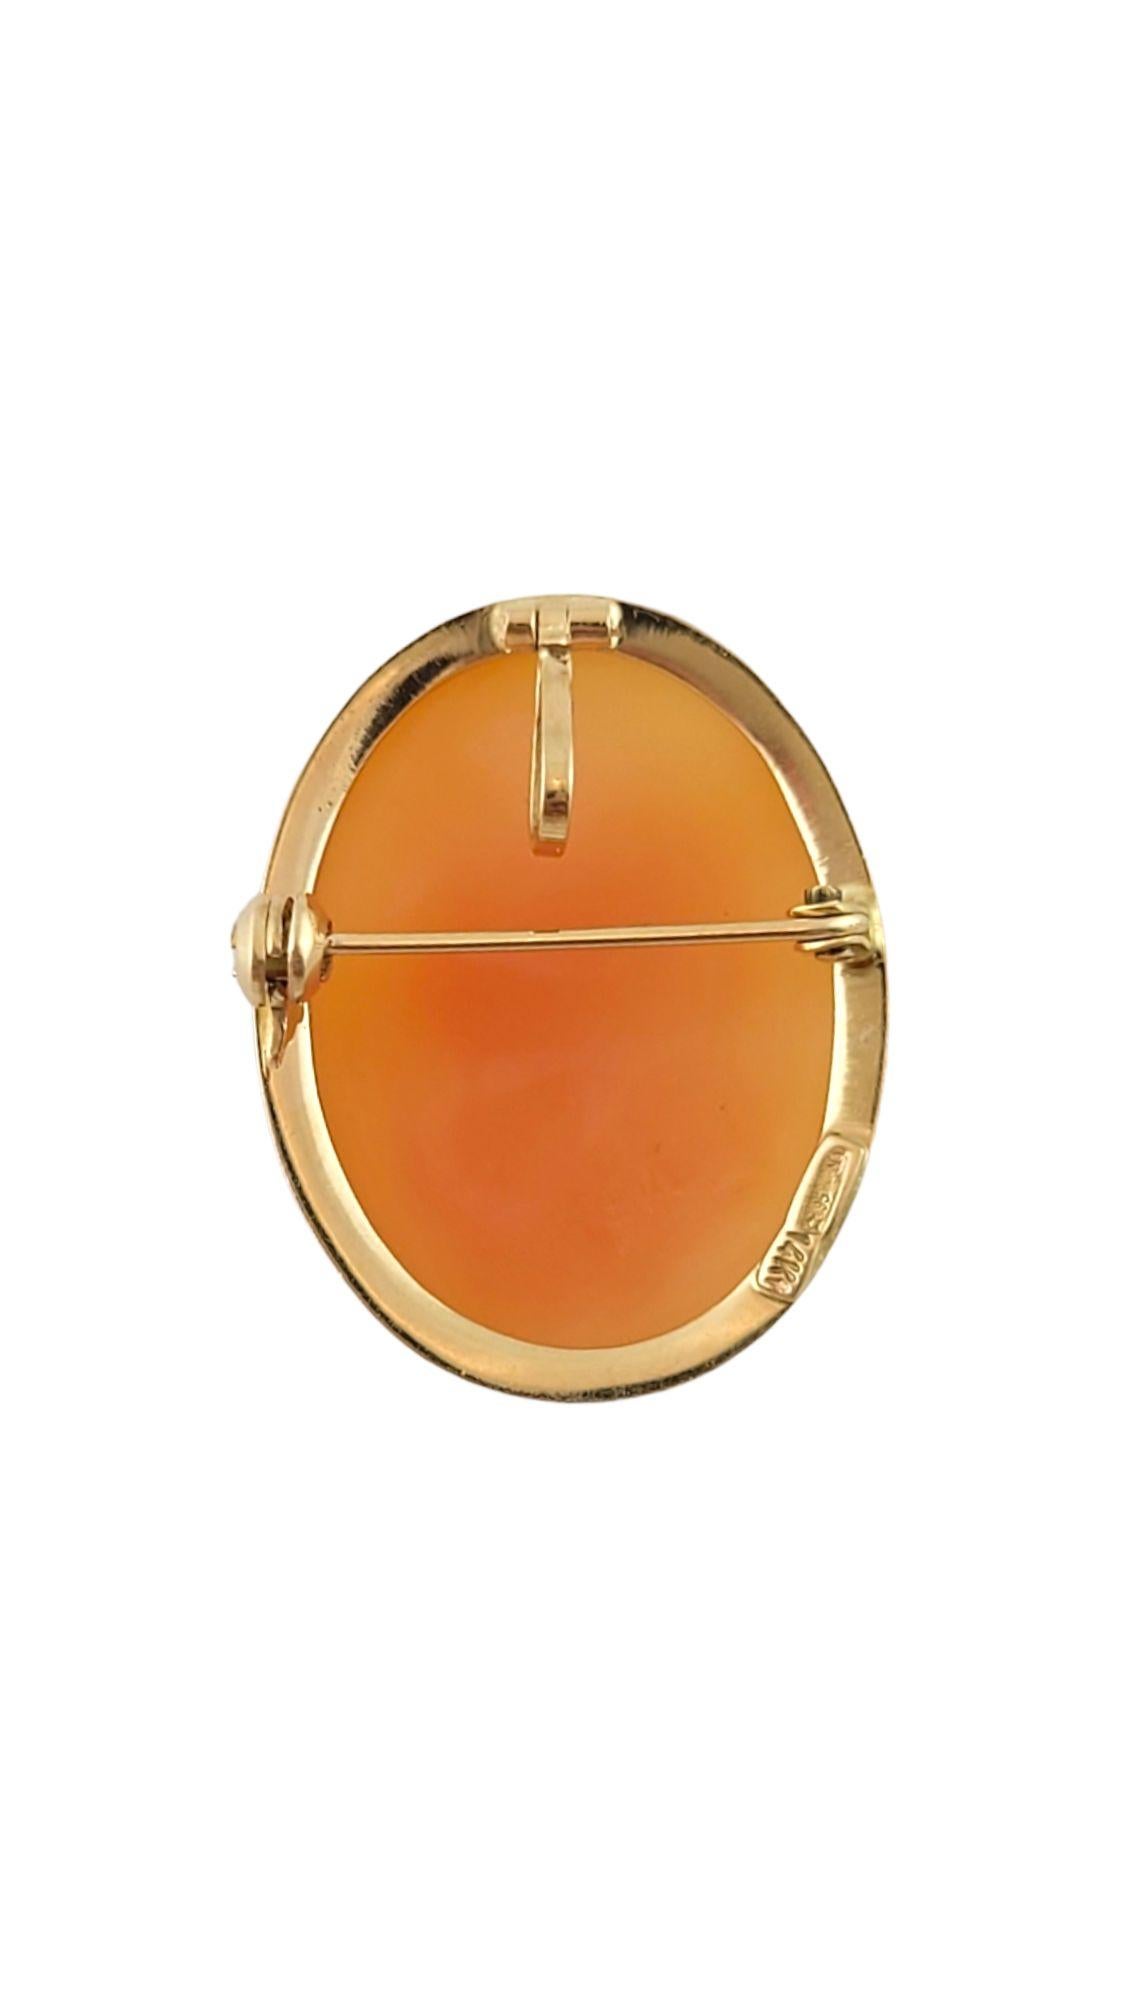 Women's 14K Yellow Gold Cameo Pin/Pendant #14619 For Sale